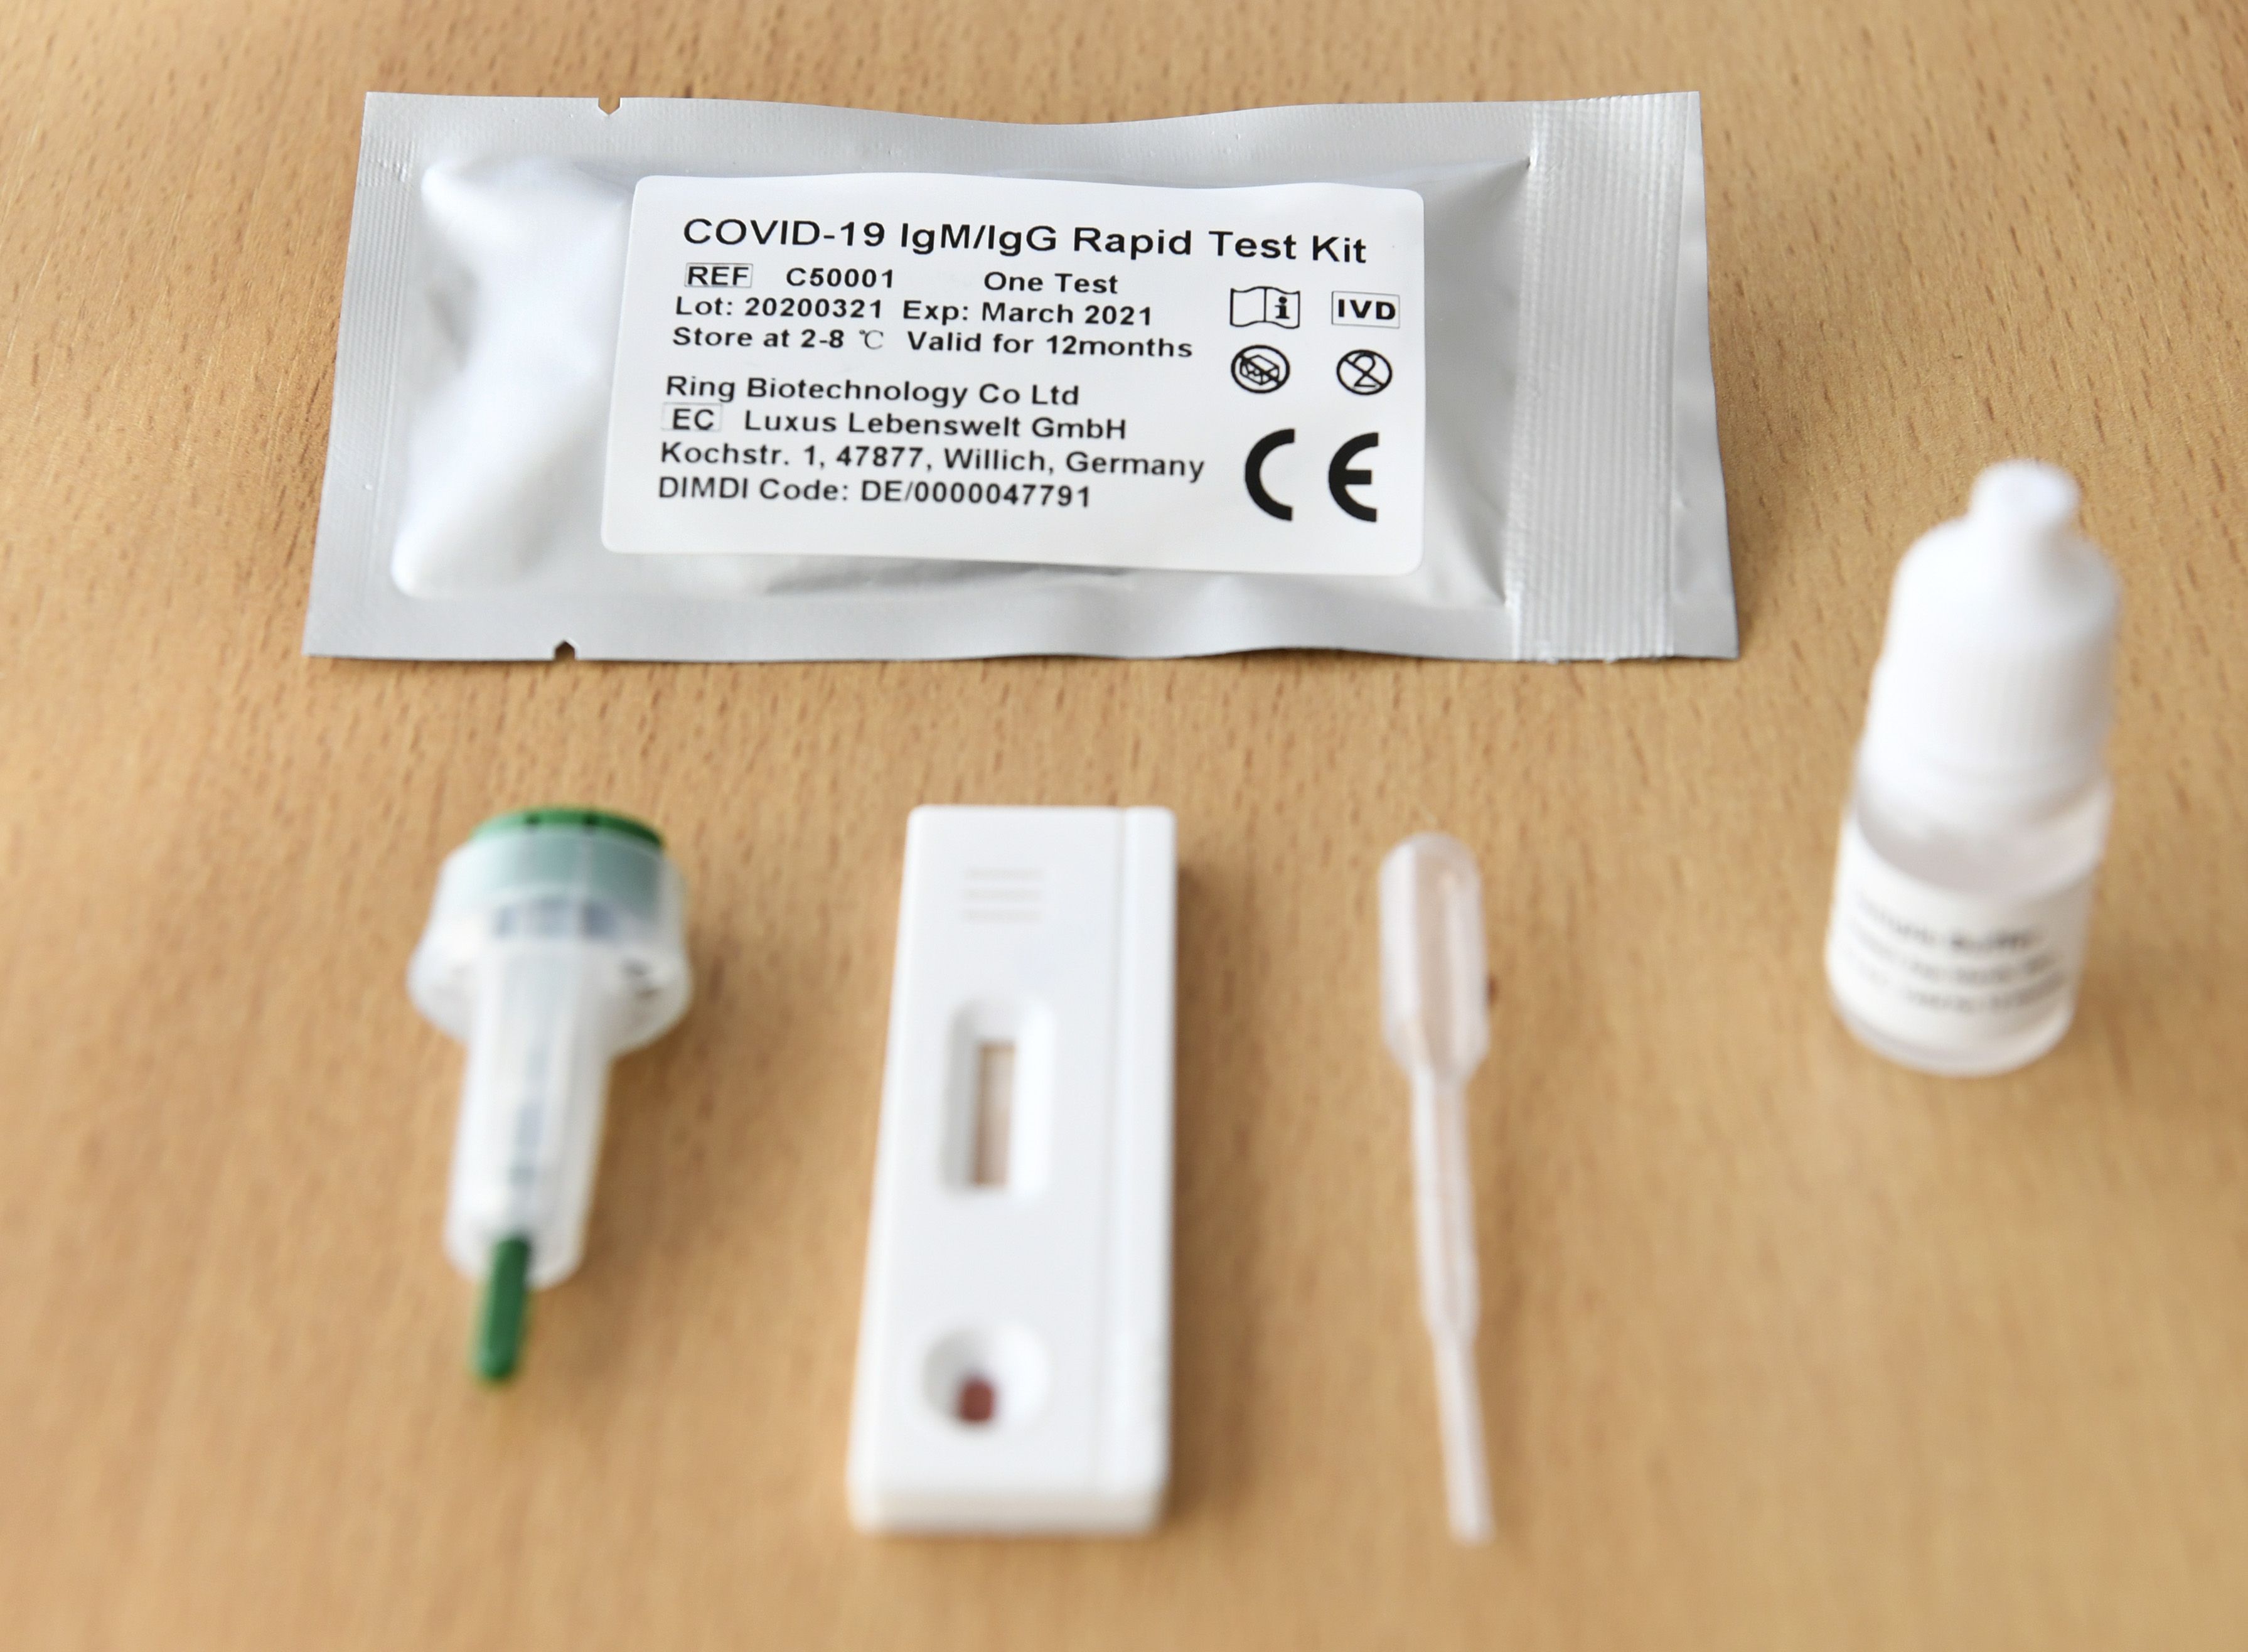 COVID-19 rapid test kit at the World Health Laboratories (Photo by PIROSCHKA VAN DE WOUW/ANP/AFP via Getty Images)